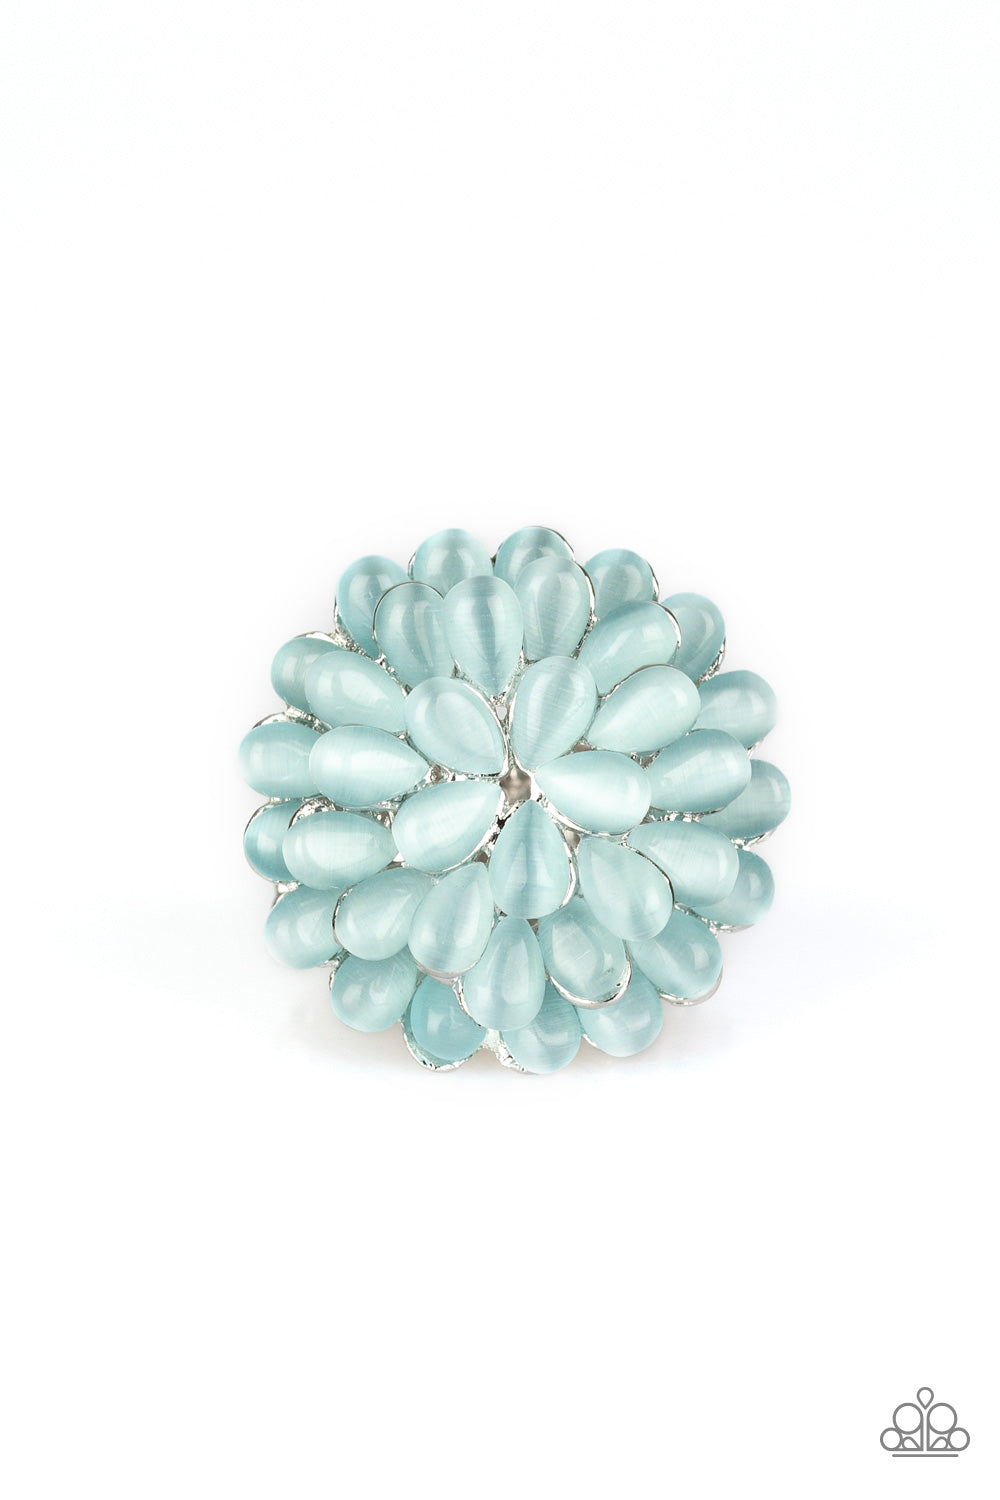 Paparazzi Accessories - Bloomer - Blue Ring